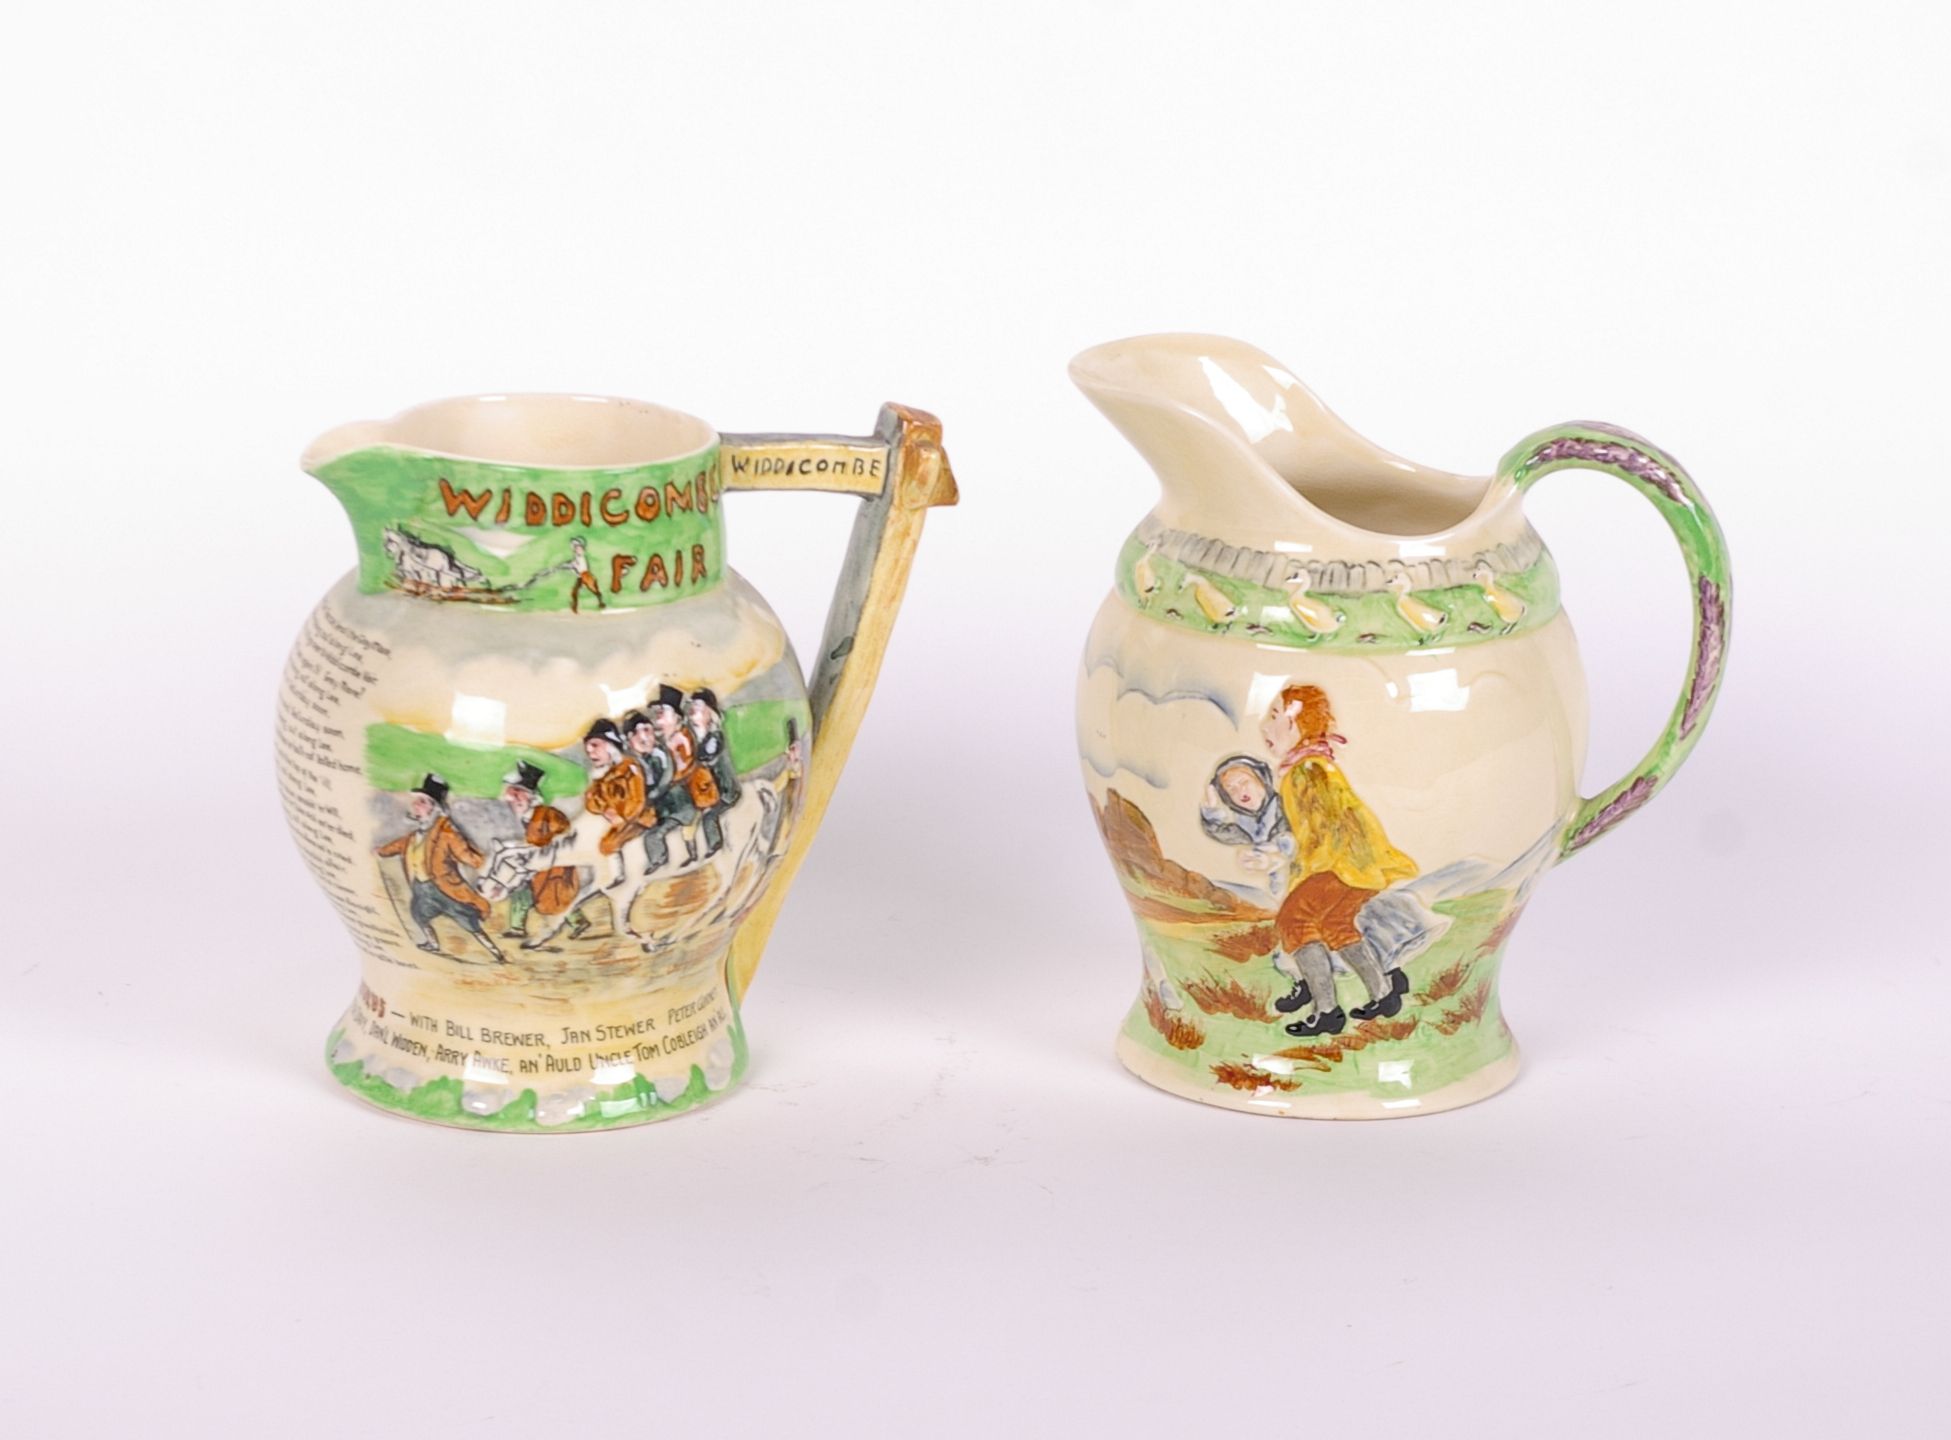 Two Crown Devon musical jugs: 'Widecombe Fair' and 'on Ilkley Moor Baht'at', both in working